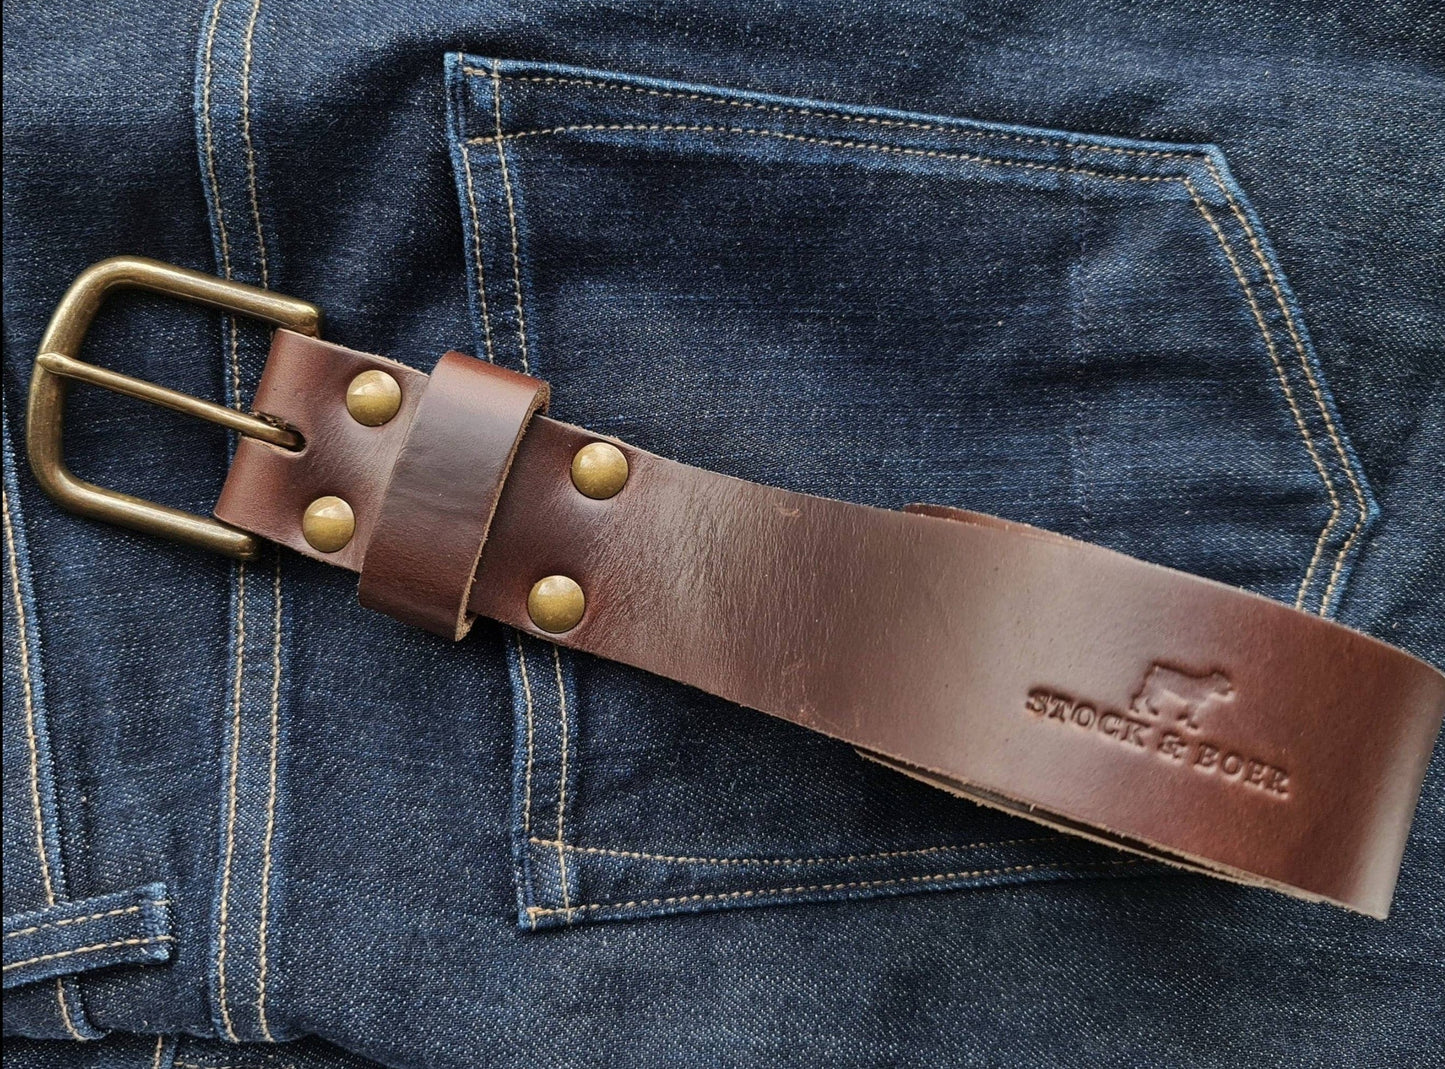 No. 8 Vaquero Full Grain Leather Belt, Horween Brown Chromexcel Leather, Side on Jeans